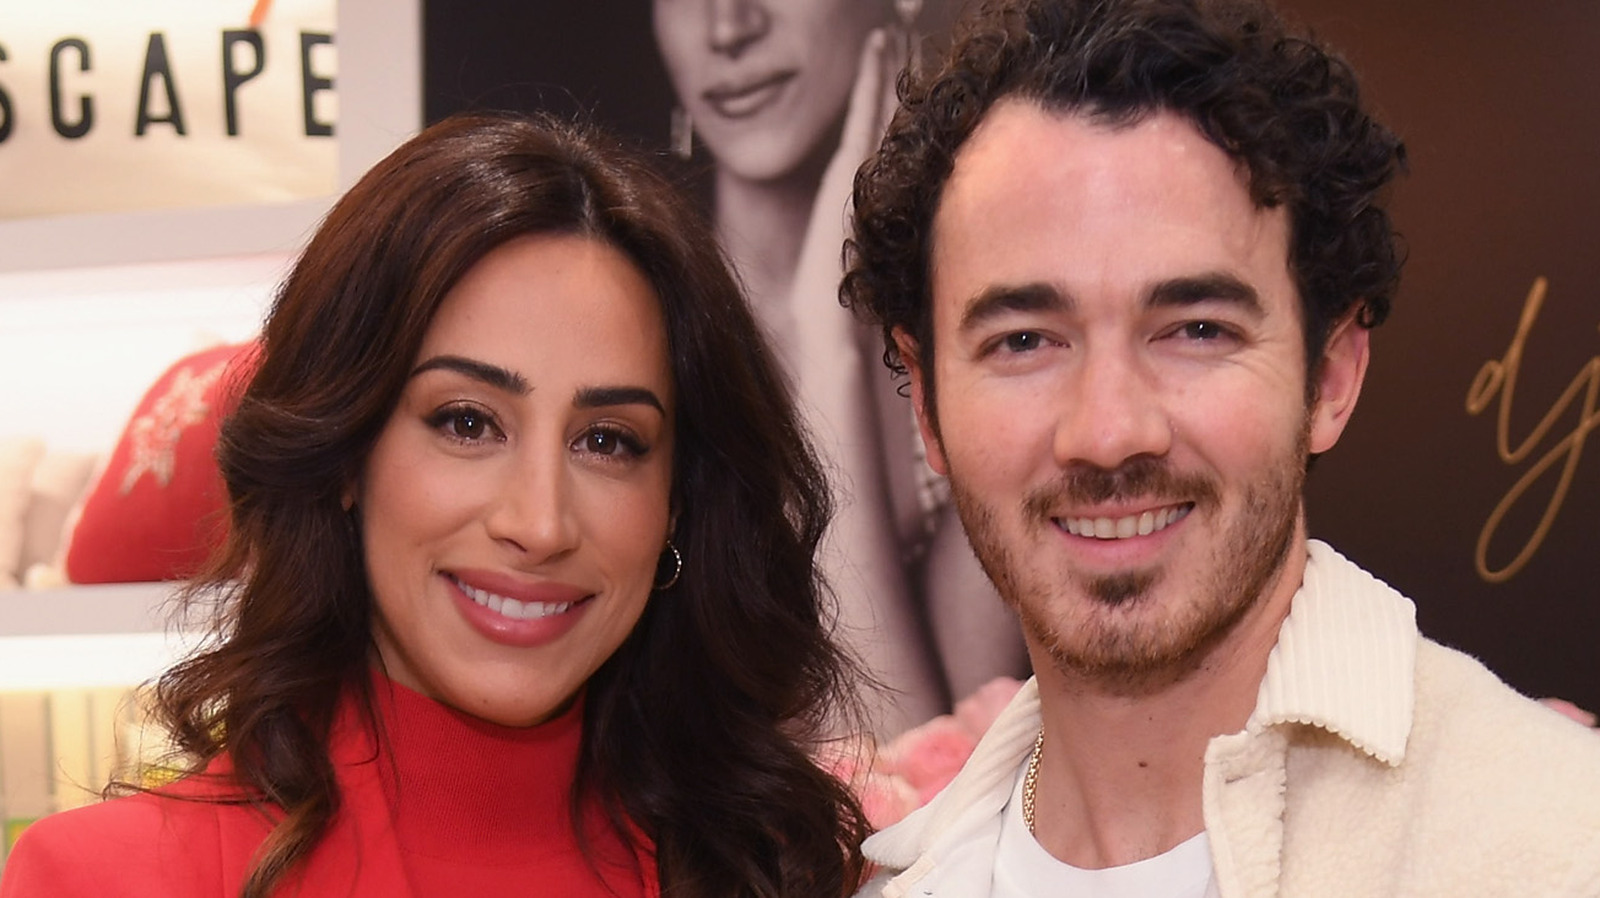 Kevin Jonas Reveals the Spot He Met Wife Danielle in Honor of 11th